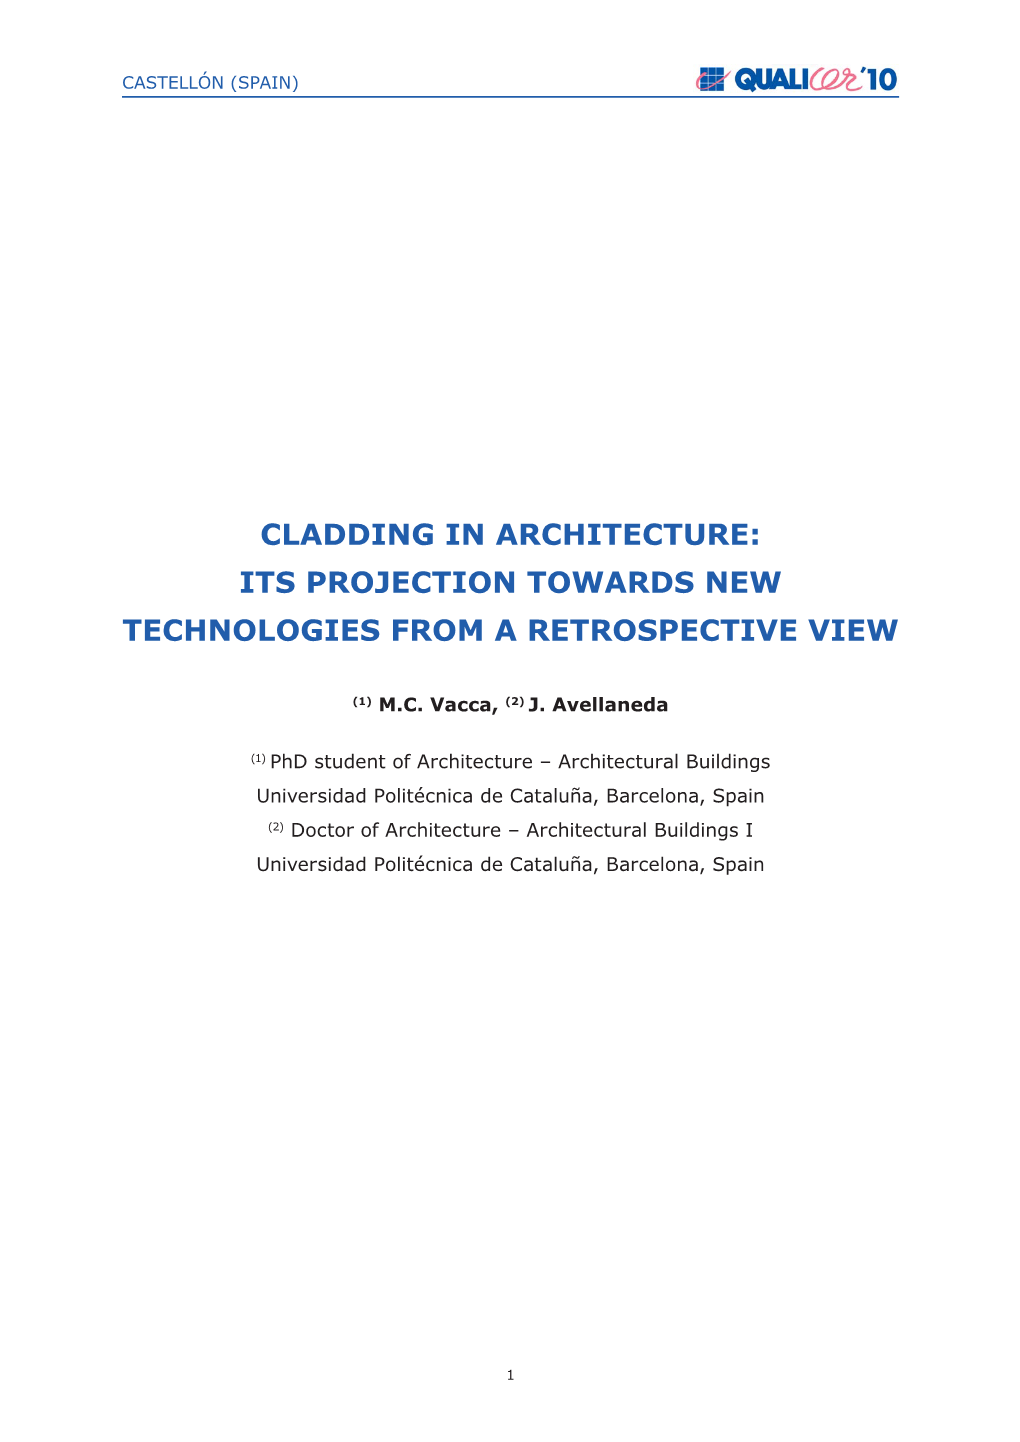 Cladding in Architecture: Its Projection Towards New Technologies from a Retrospective View